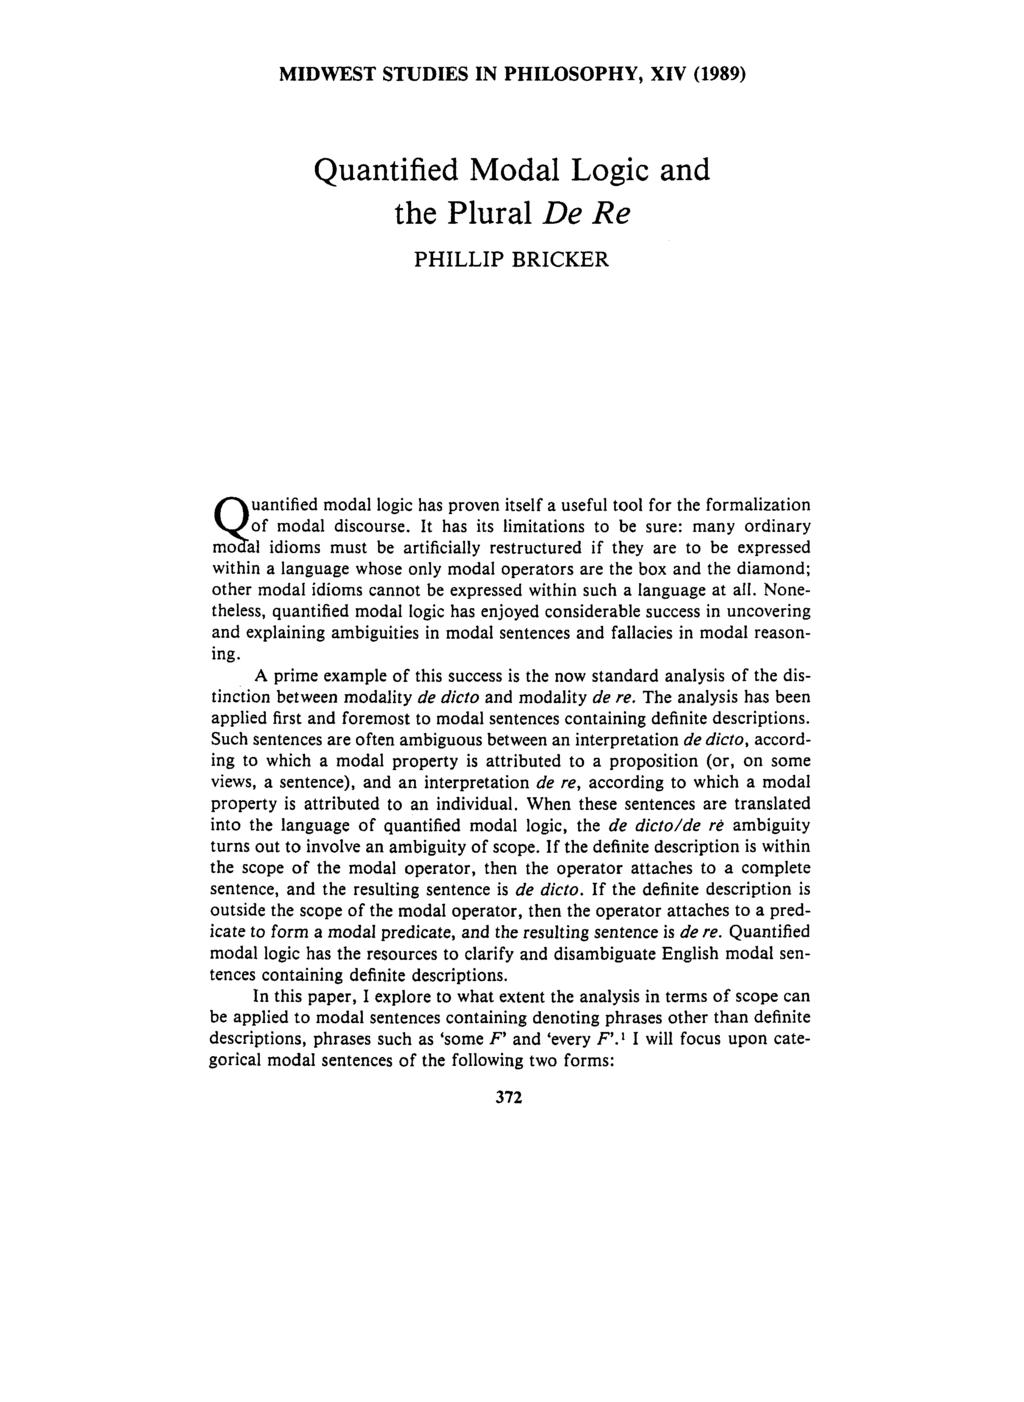 MIDWEST STUDIES IN PHILOSOPHY, XIV (1989) Quantified Modal Logic and the Plural De Re PHILLIP BRICKER s uantified modal logic has proven itself a useful tool for the formalization of modal discourse.